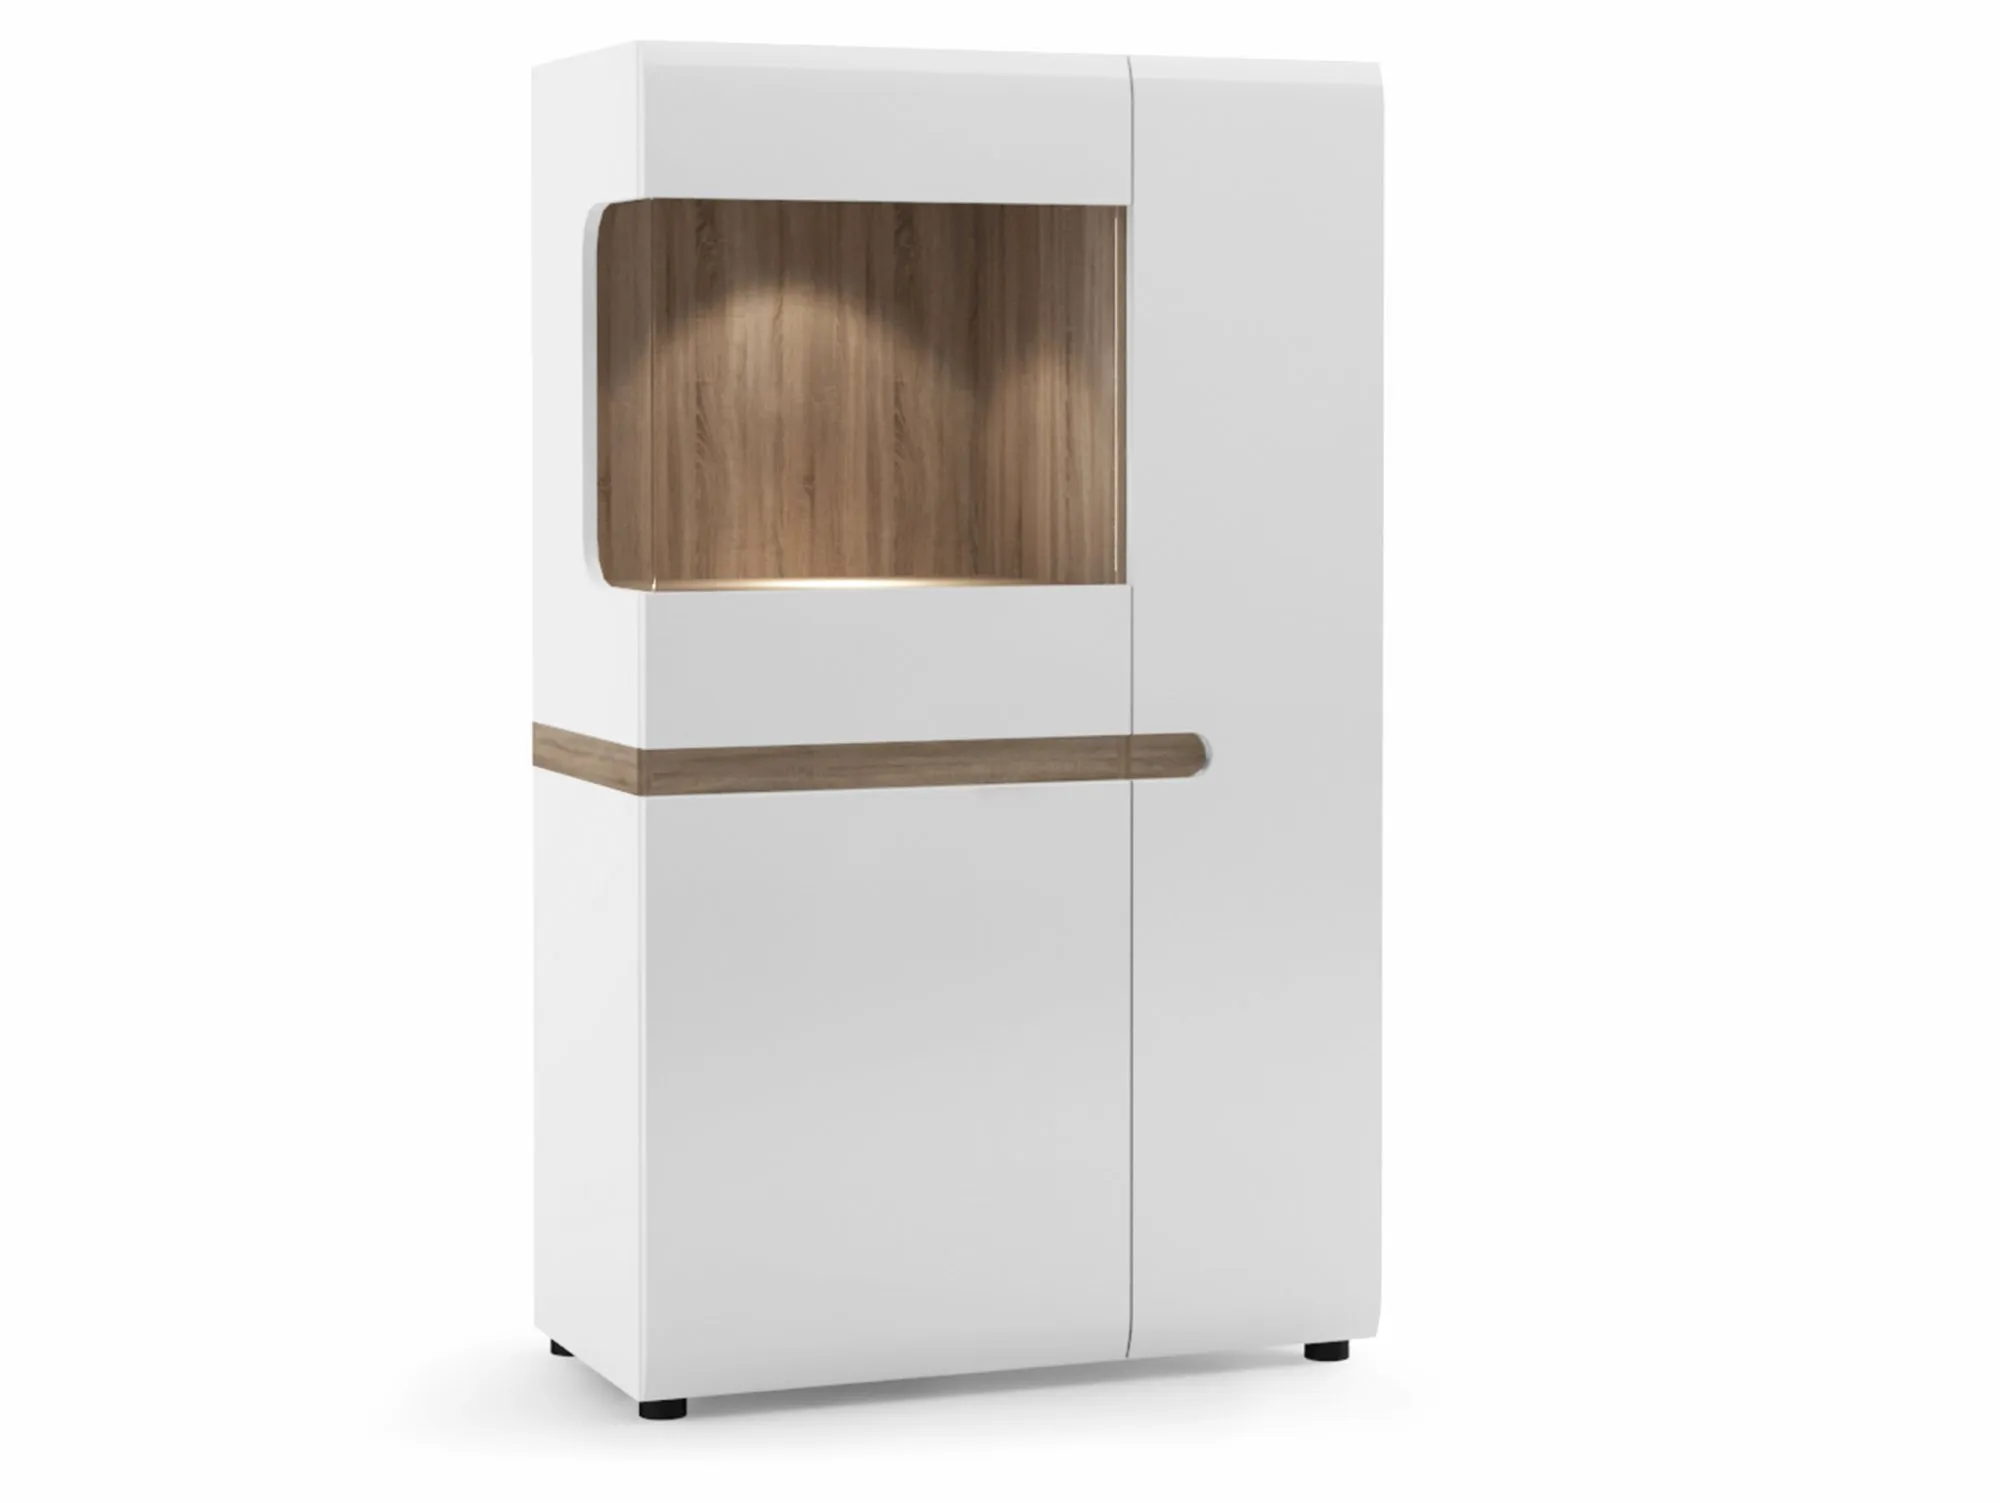 Furniture To Go Furniture To Go Chelsea White High Gloss and Truffle Oak Low 85cm Wide Display Cabinet